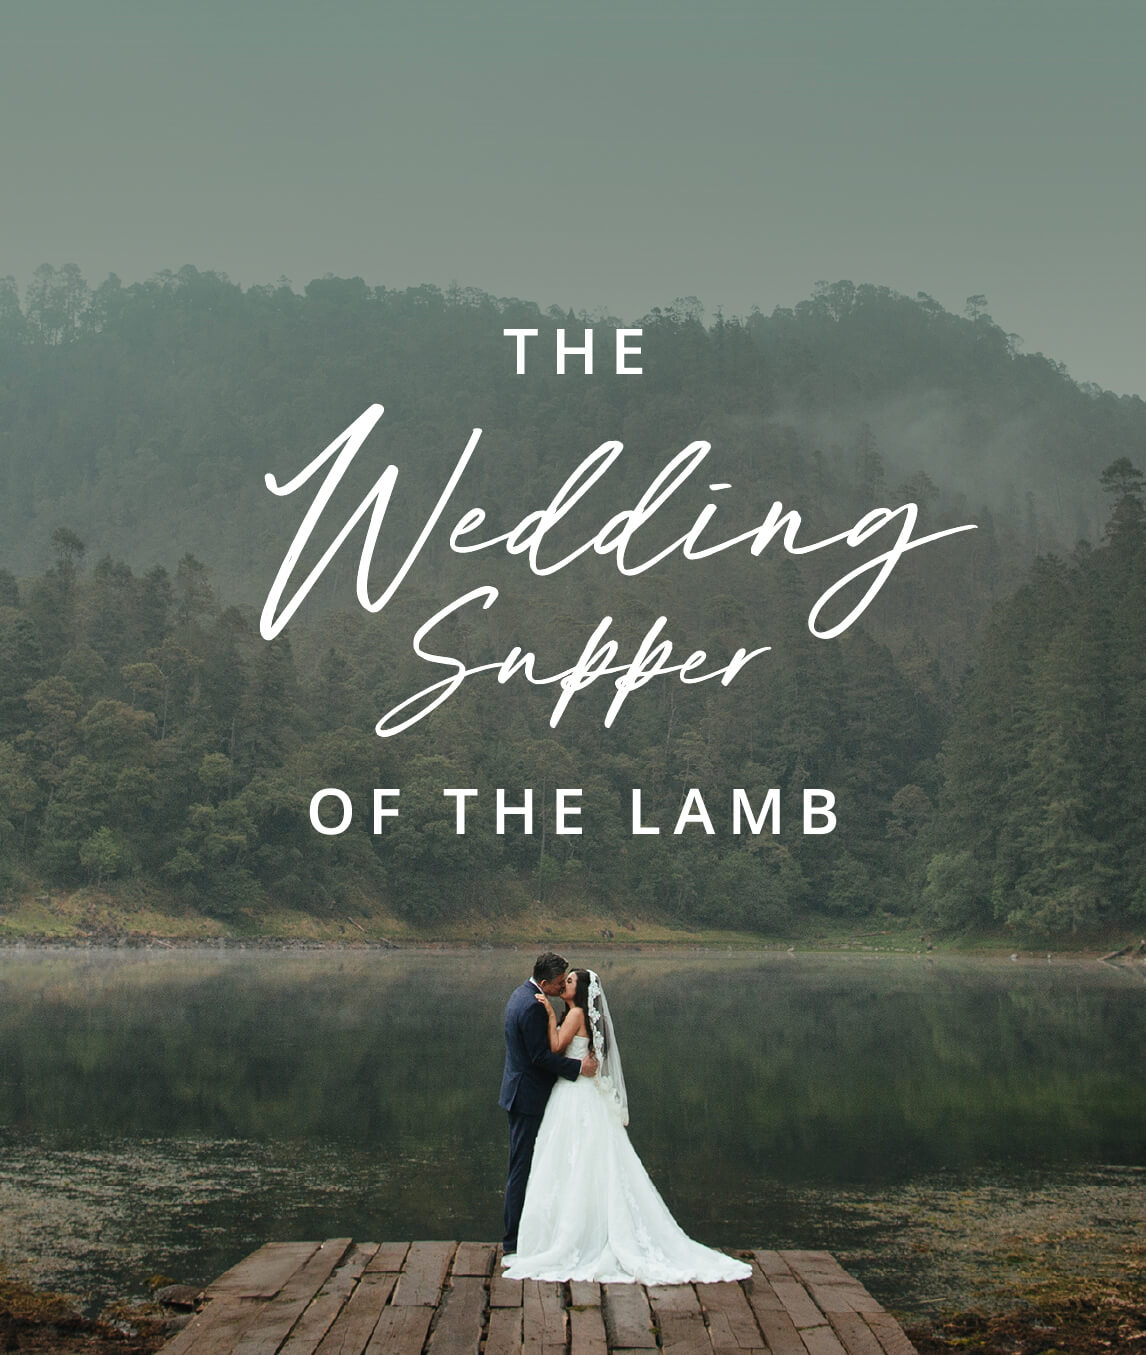 The Wedding Supper of the Lamb